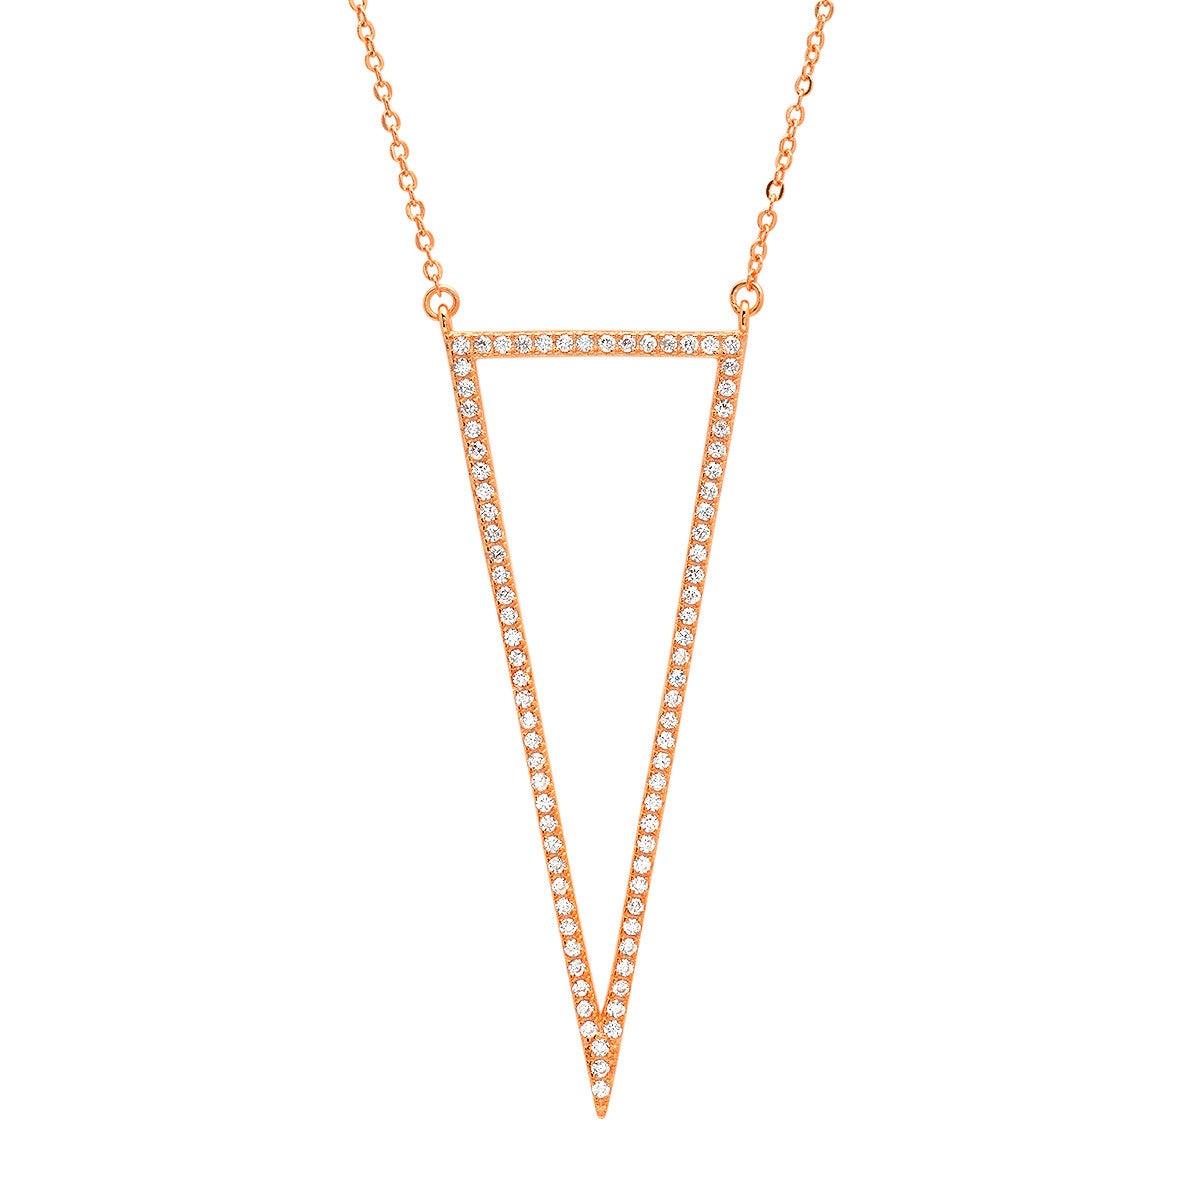 ZDN3162 STERLING SILVER 925 ROSE GOLD PLATED FINISH CZ TRIANGLE OUTLINE NECKLACE